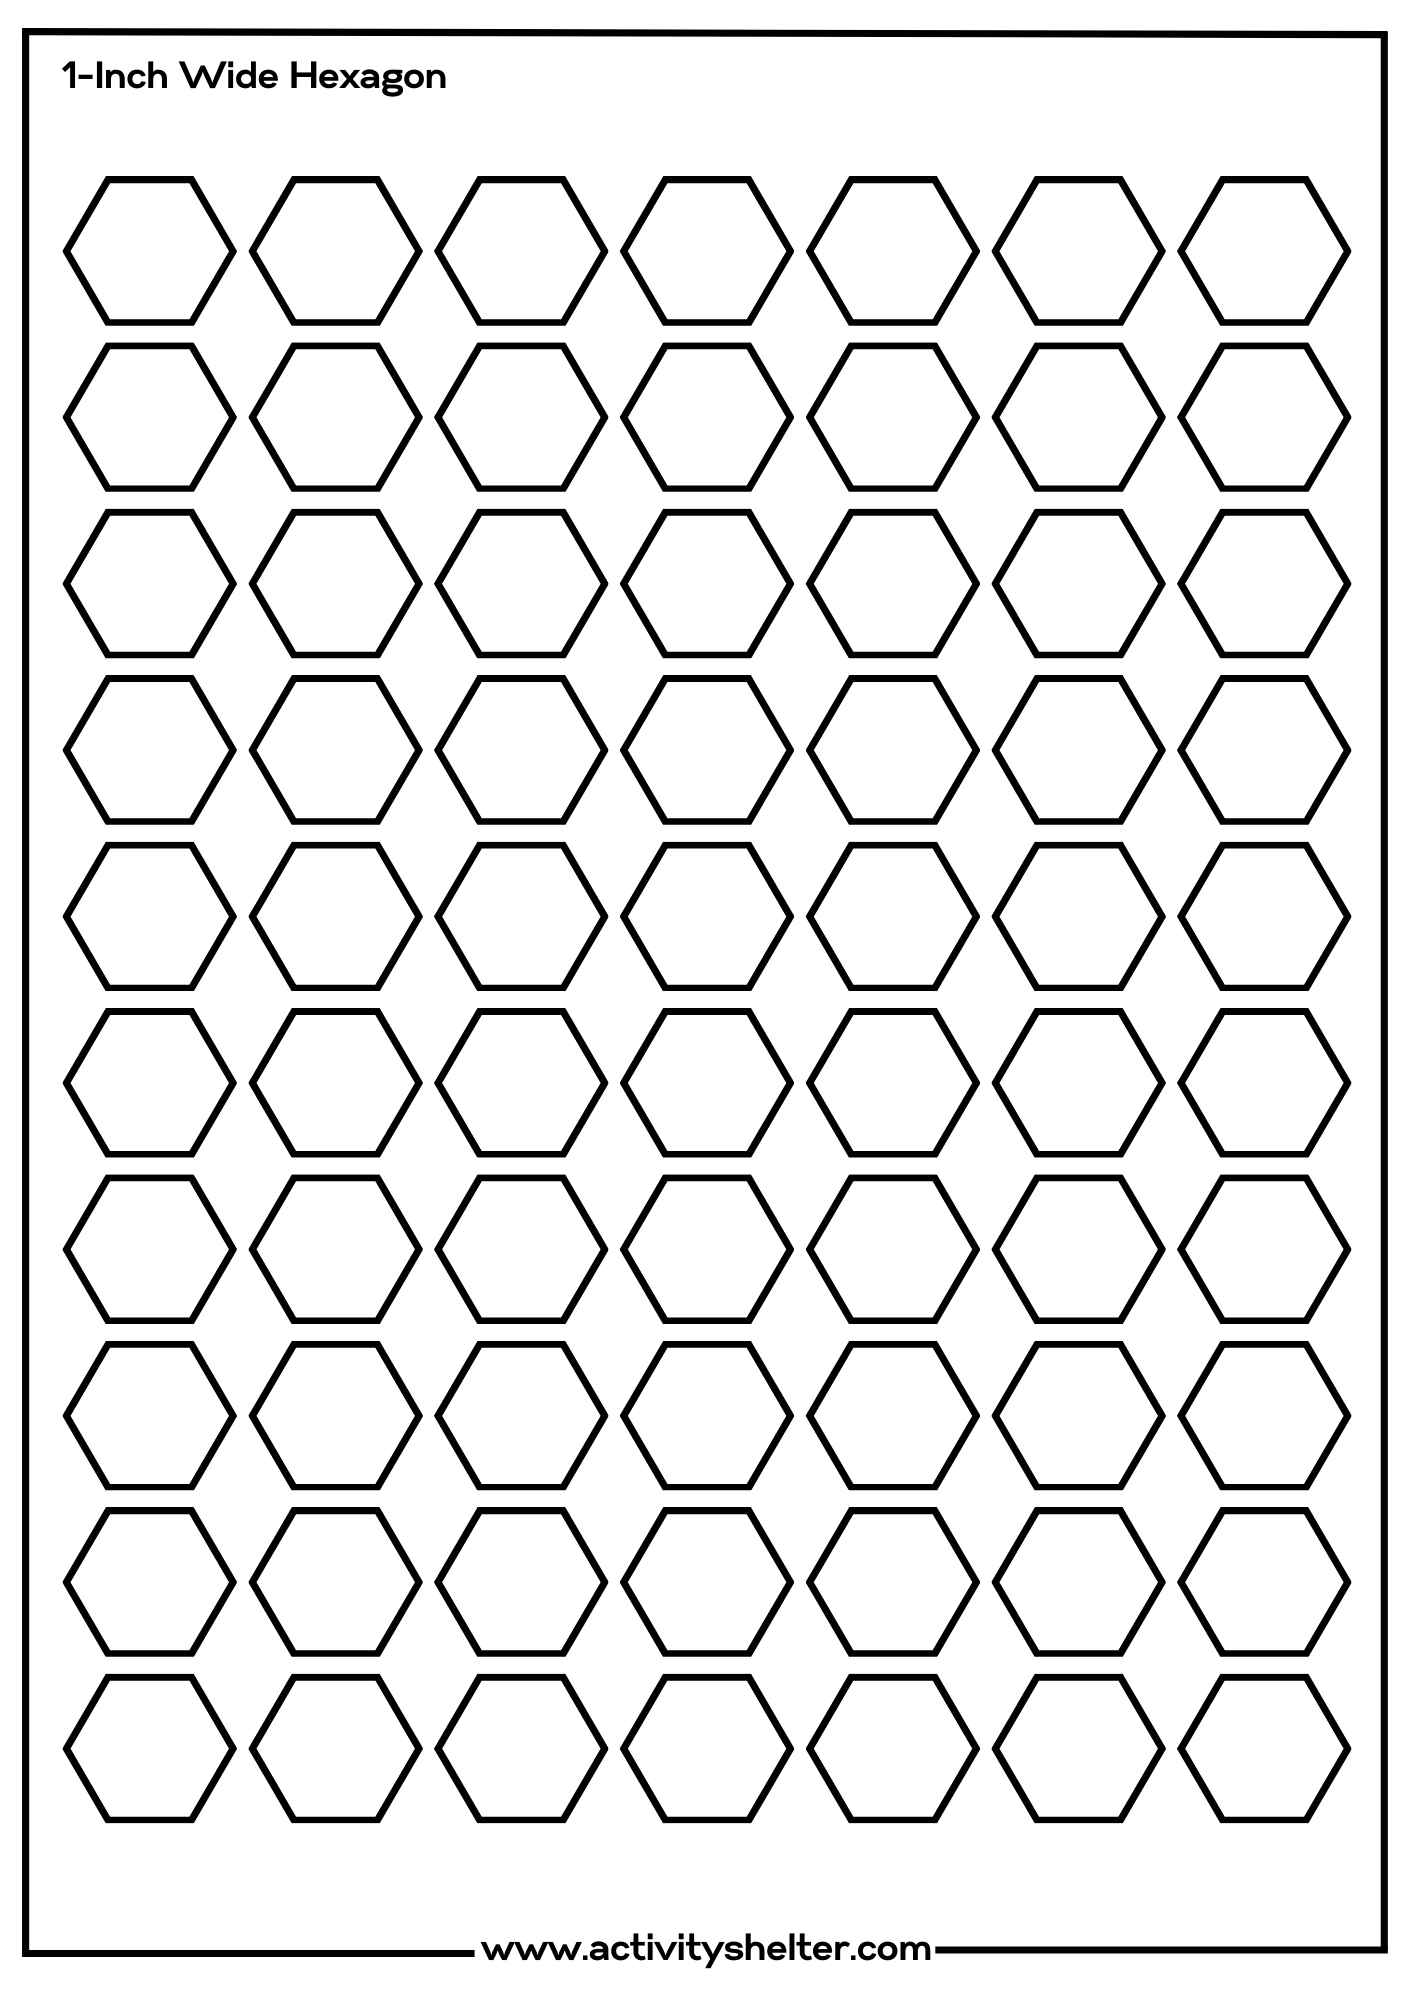 Free Hexagon Template 1-Inch Wide